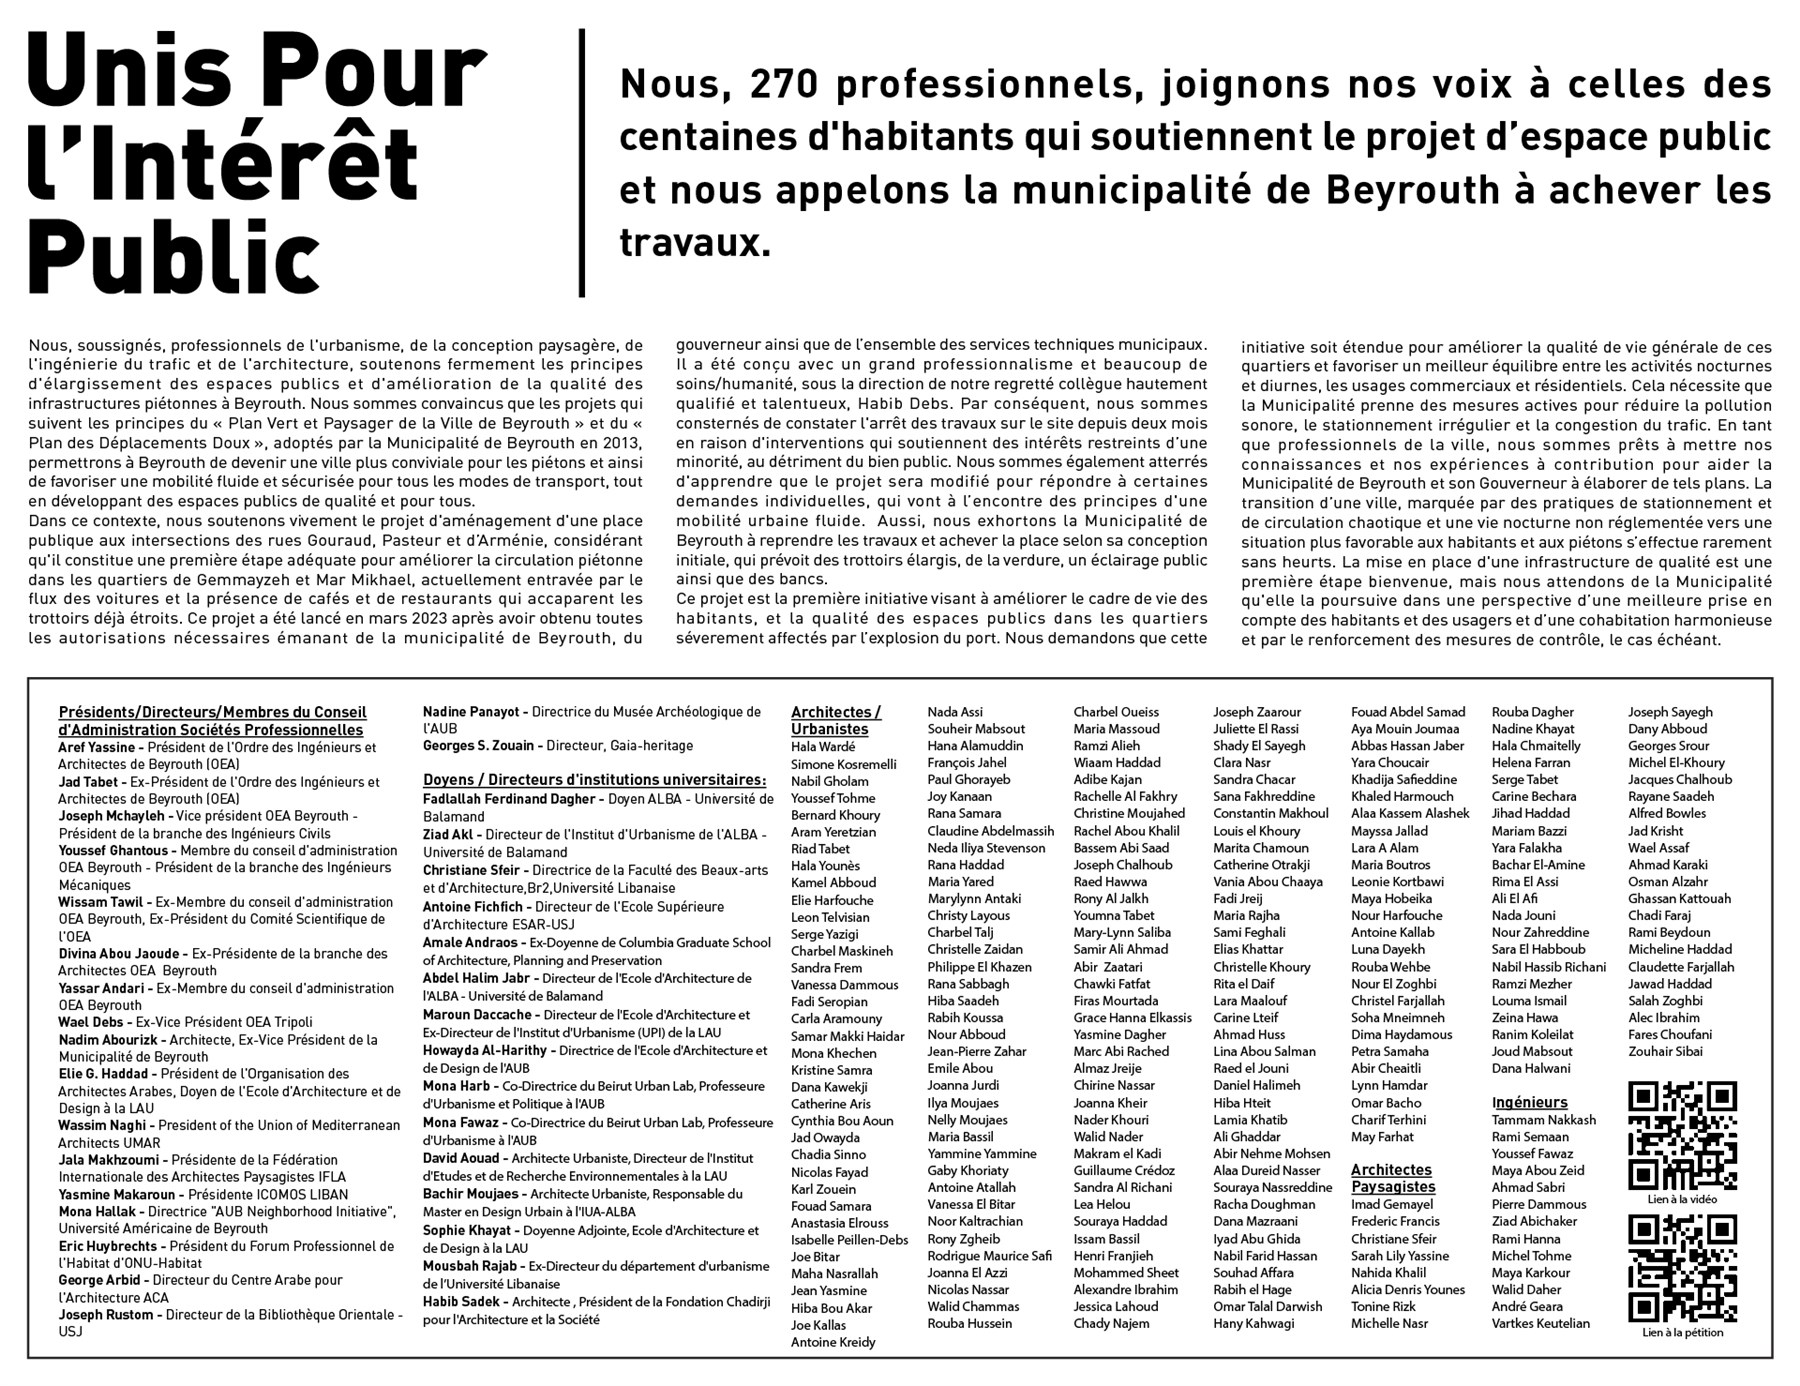 The petition as it appeared in L'Orient-Le Jour newspaper on Monday July 17, 2023